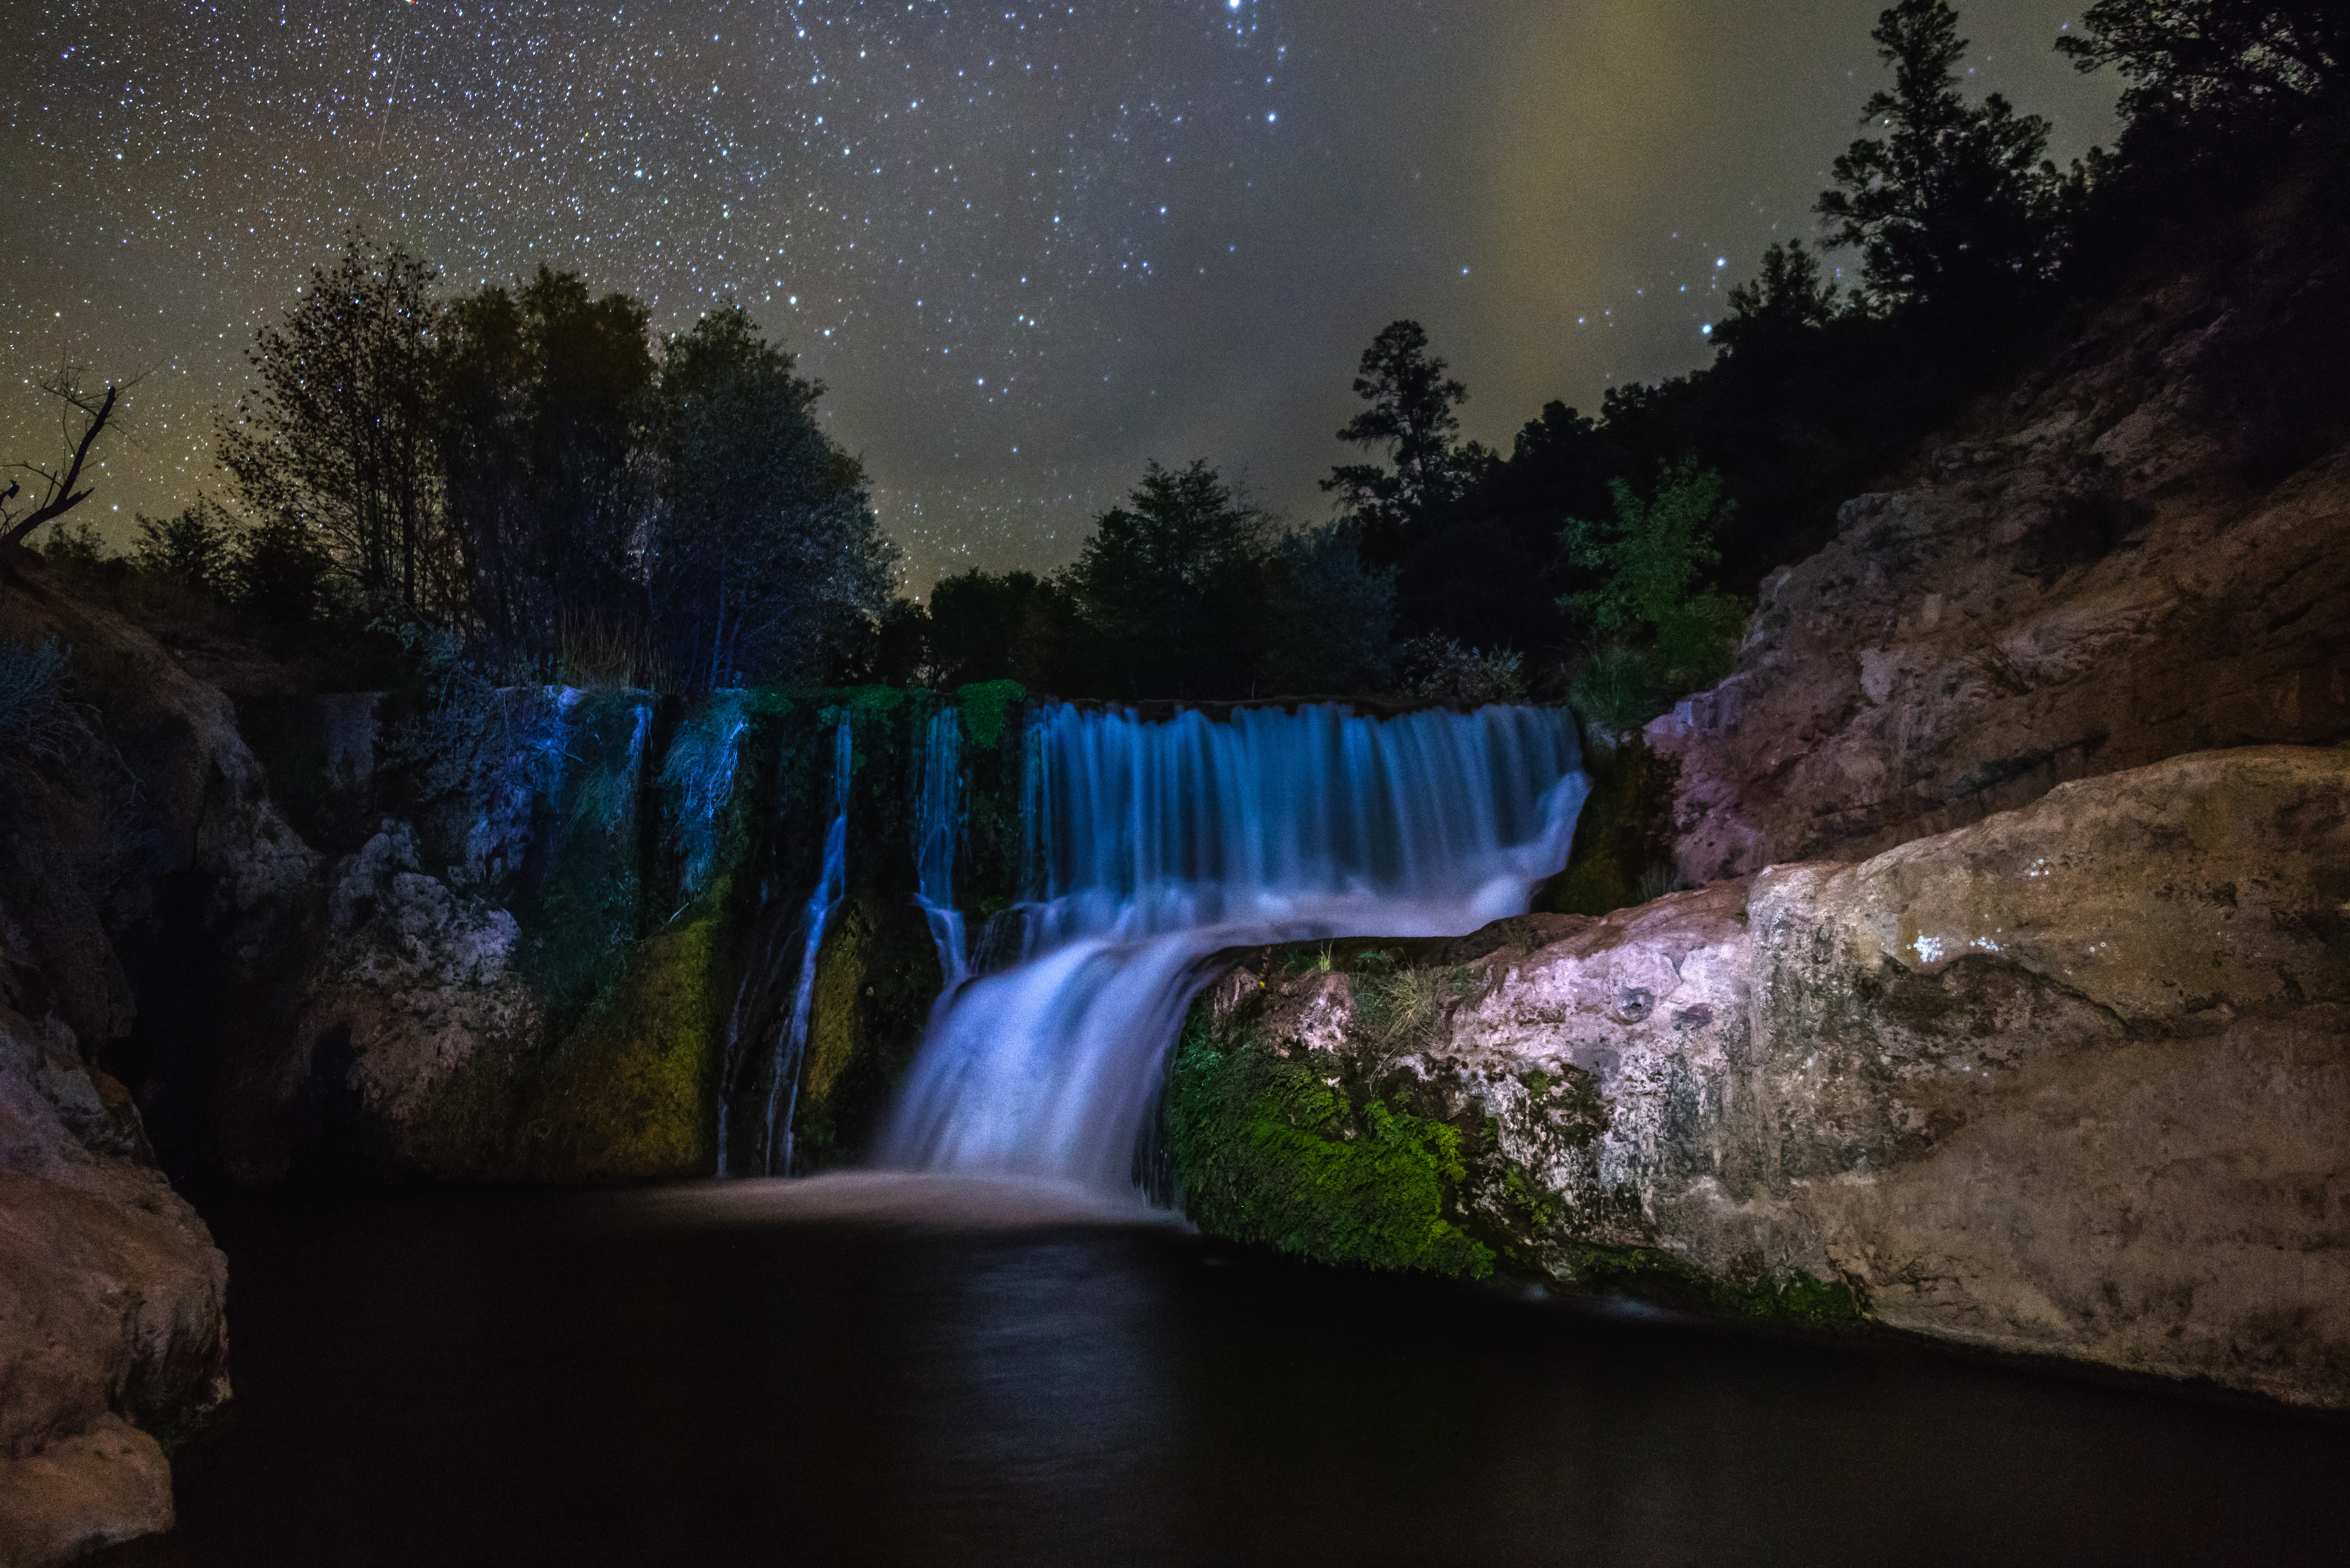 Night Sky Over The Old Fossil Creek Diversion Dam Image Free